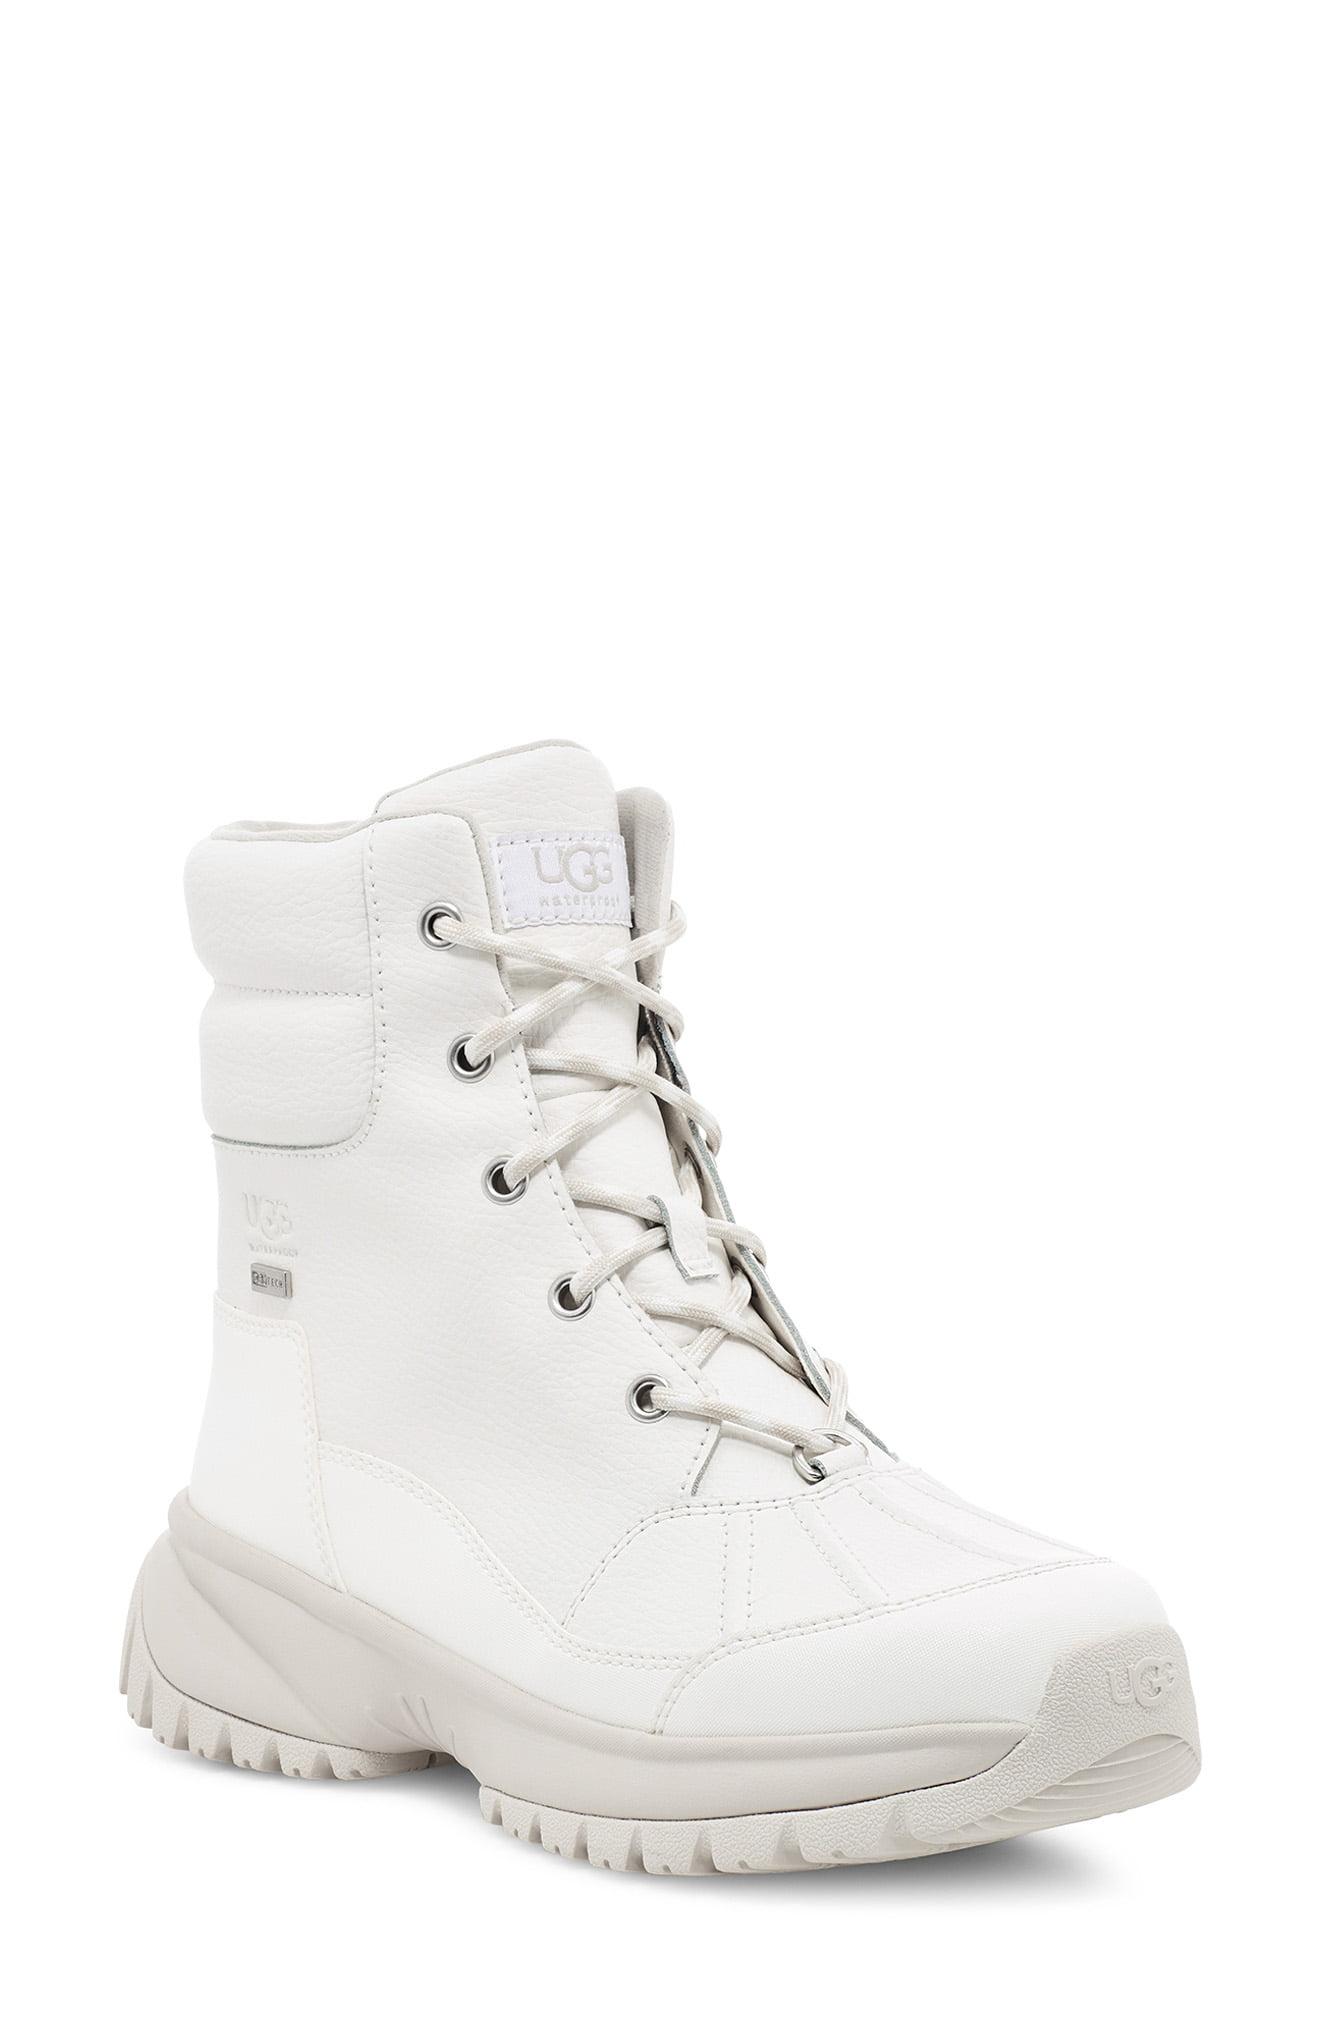 UGG Wool UGG Yose Waterproof Lace-up Boot in White Leather (White) - Lyst